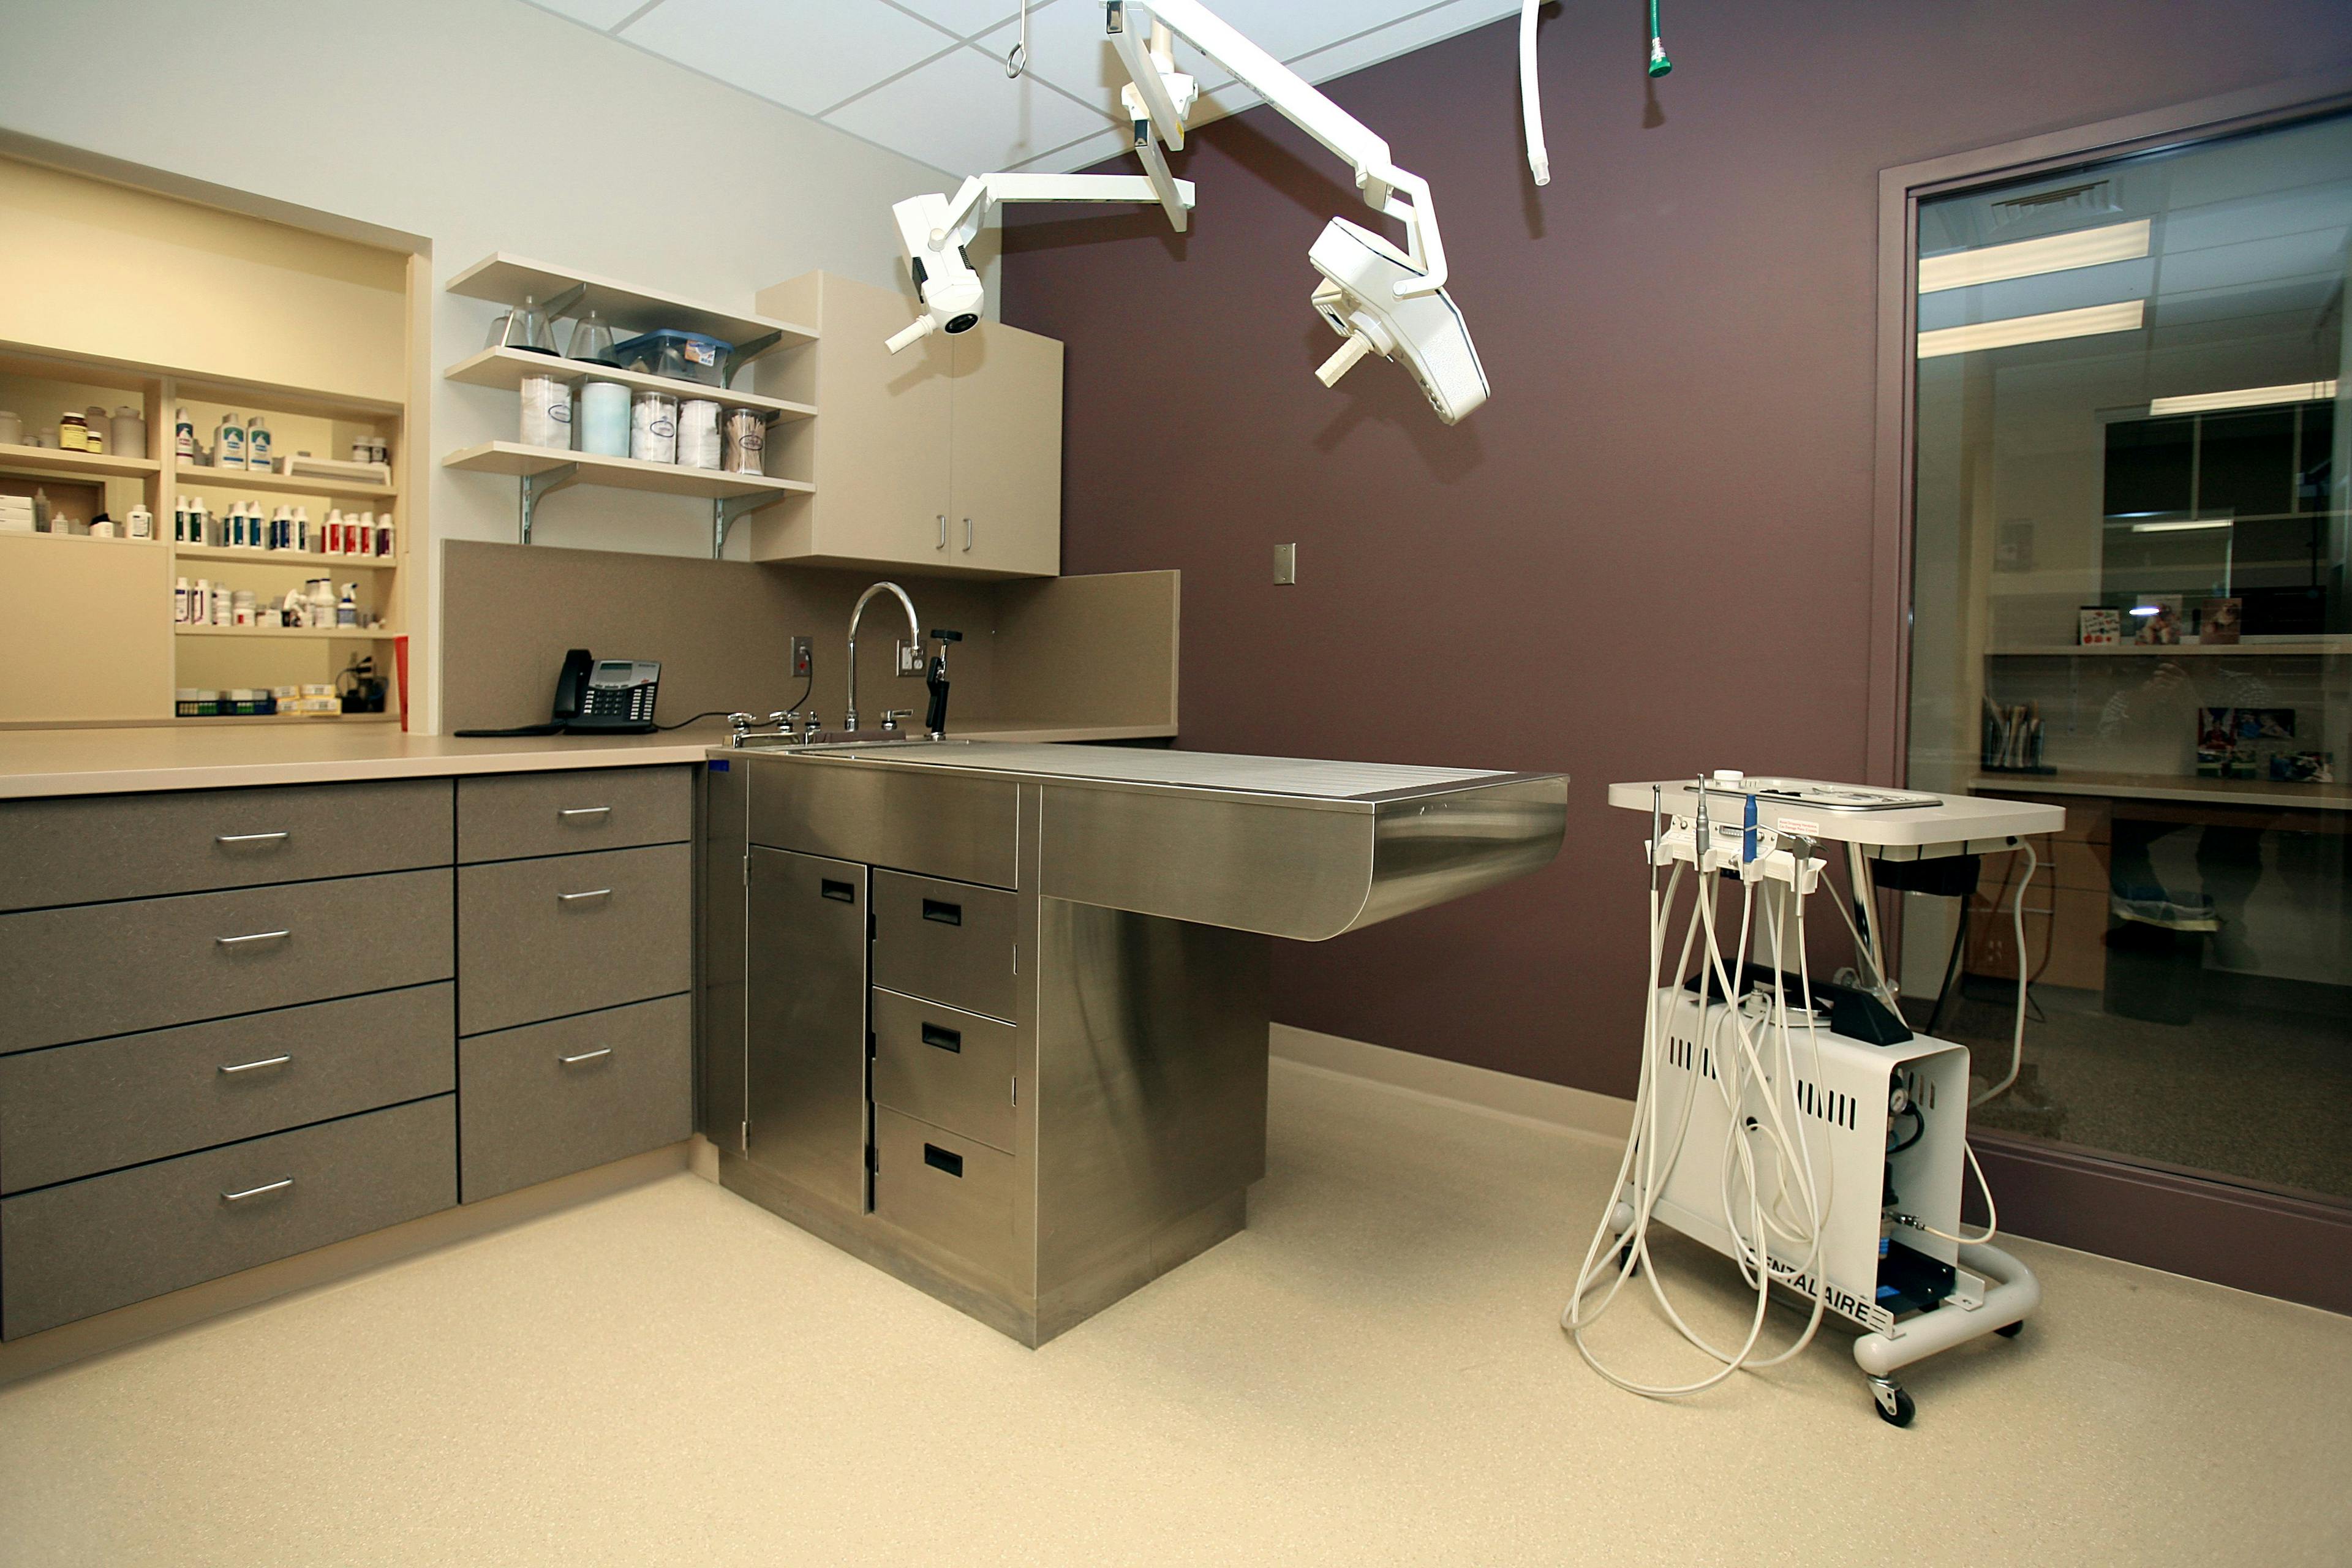 Dedicated dental space within treatment with fixed x-ray.